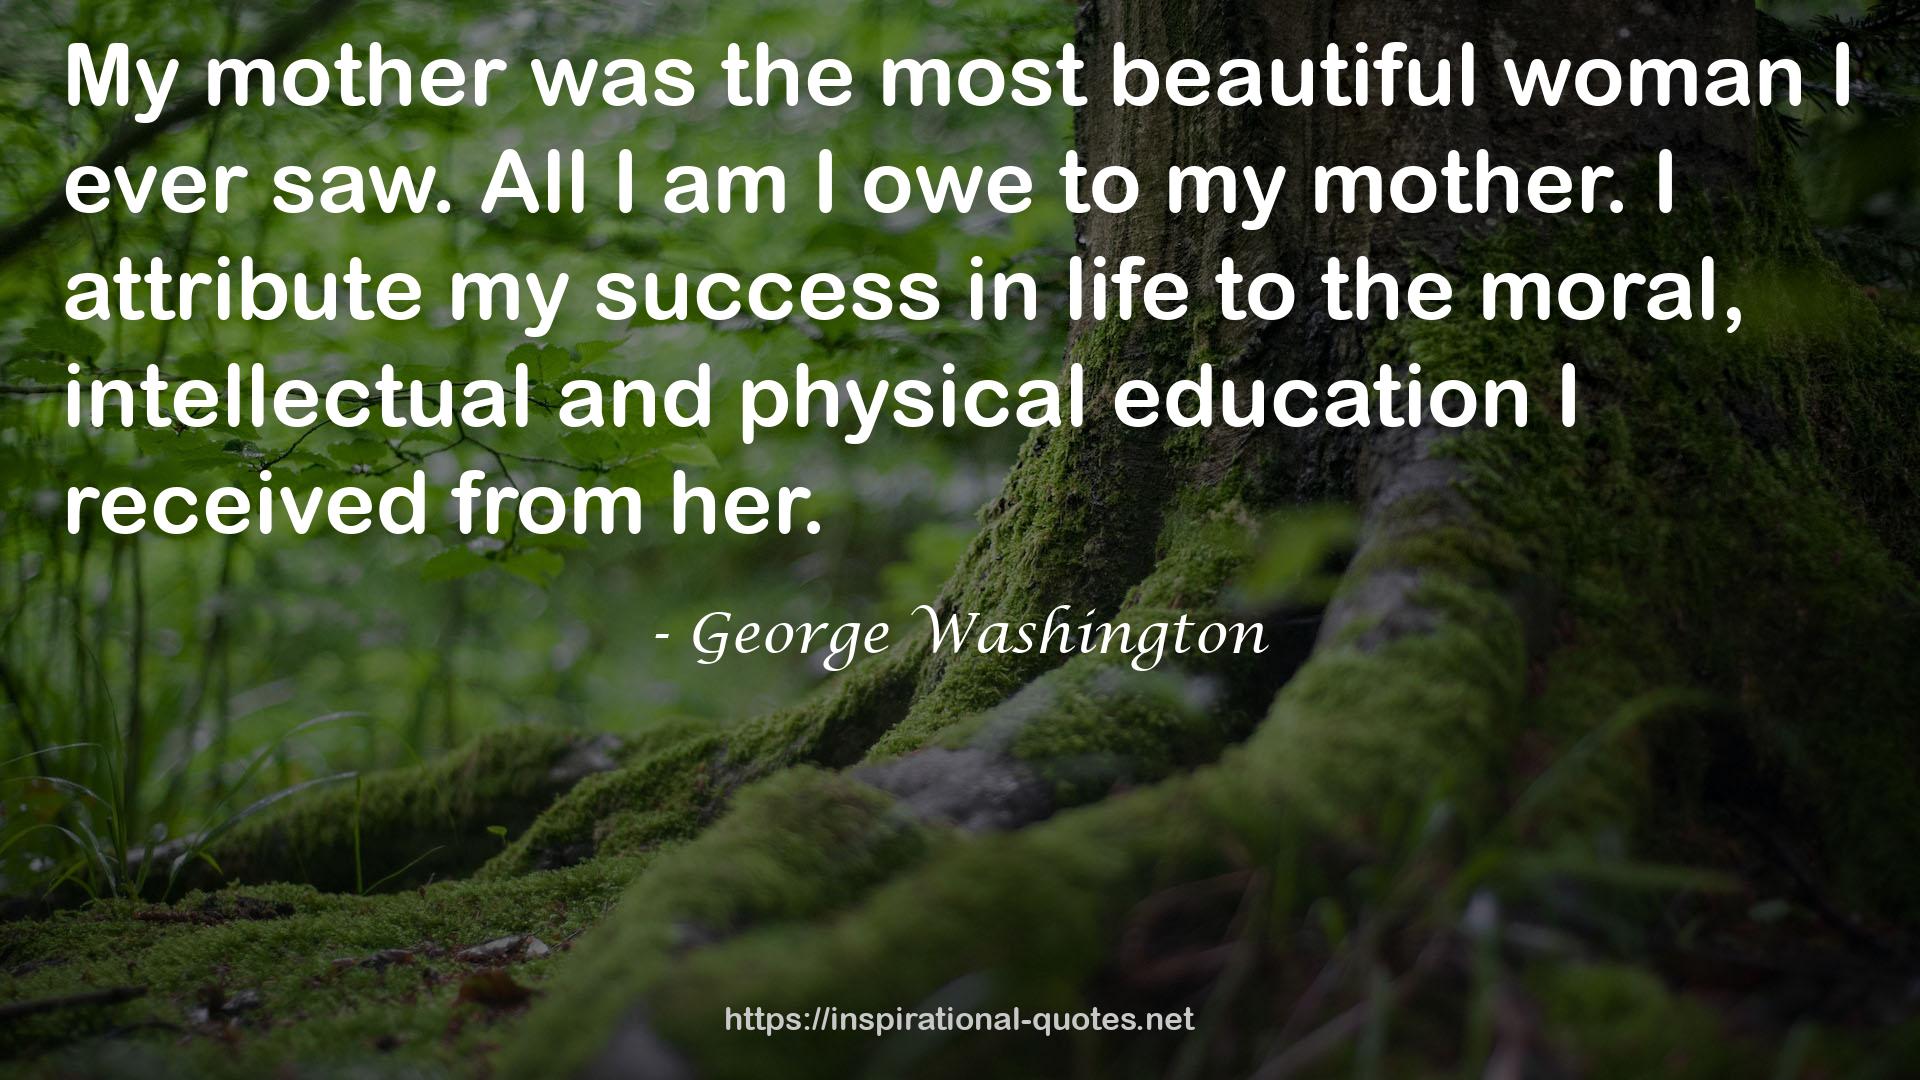 the most beautiful woman  QUOTES